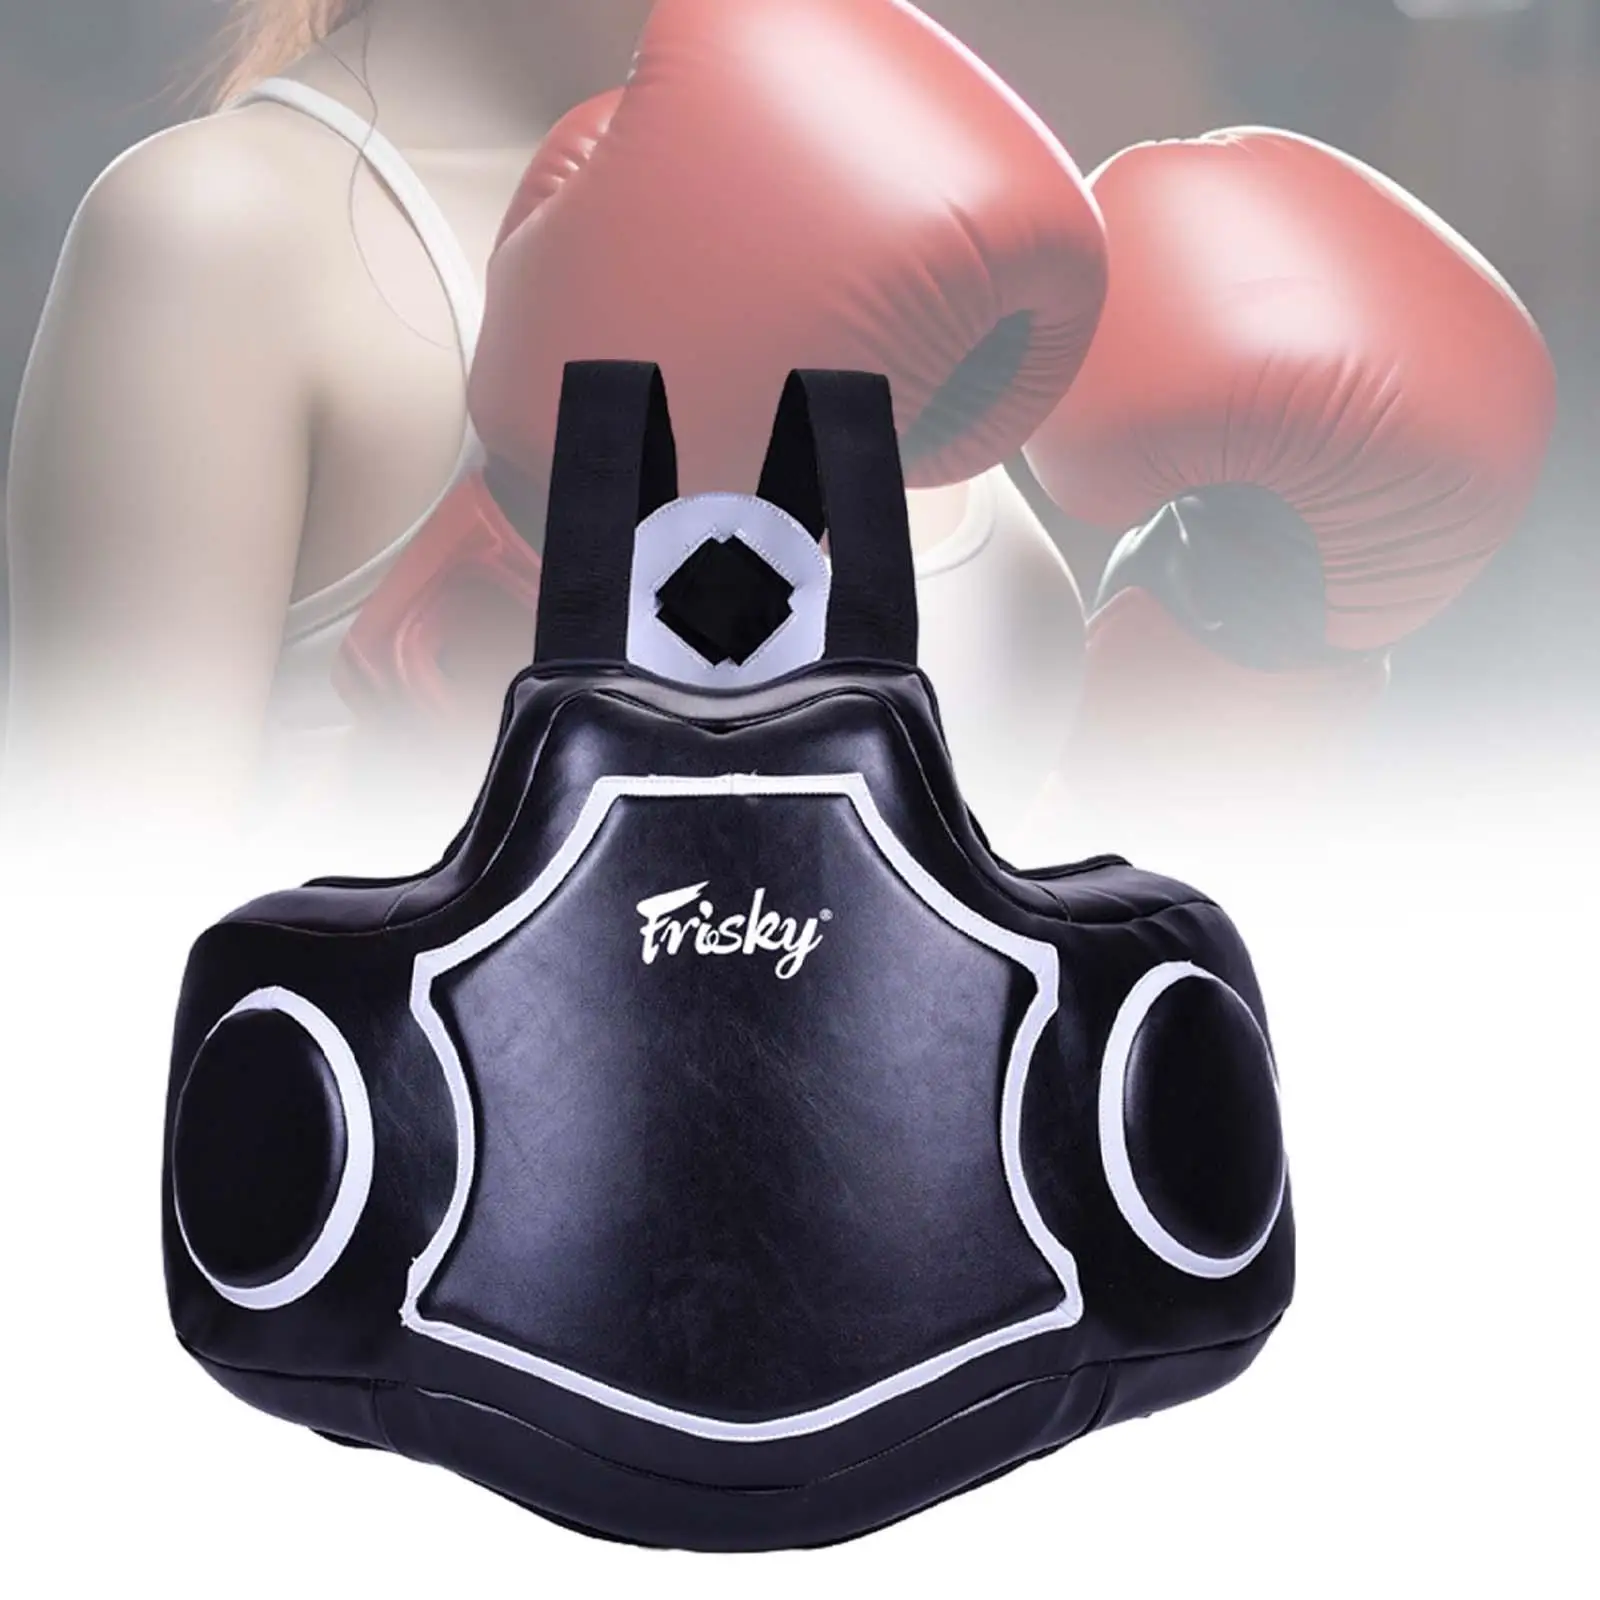 Boxing Body Protector Black for Men Women Rib Protection Chest Protector for Martial Arts Kickboxing Sparring Taekwondo Training